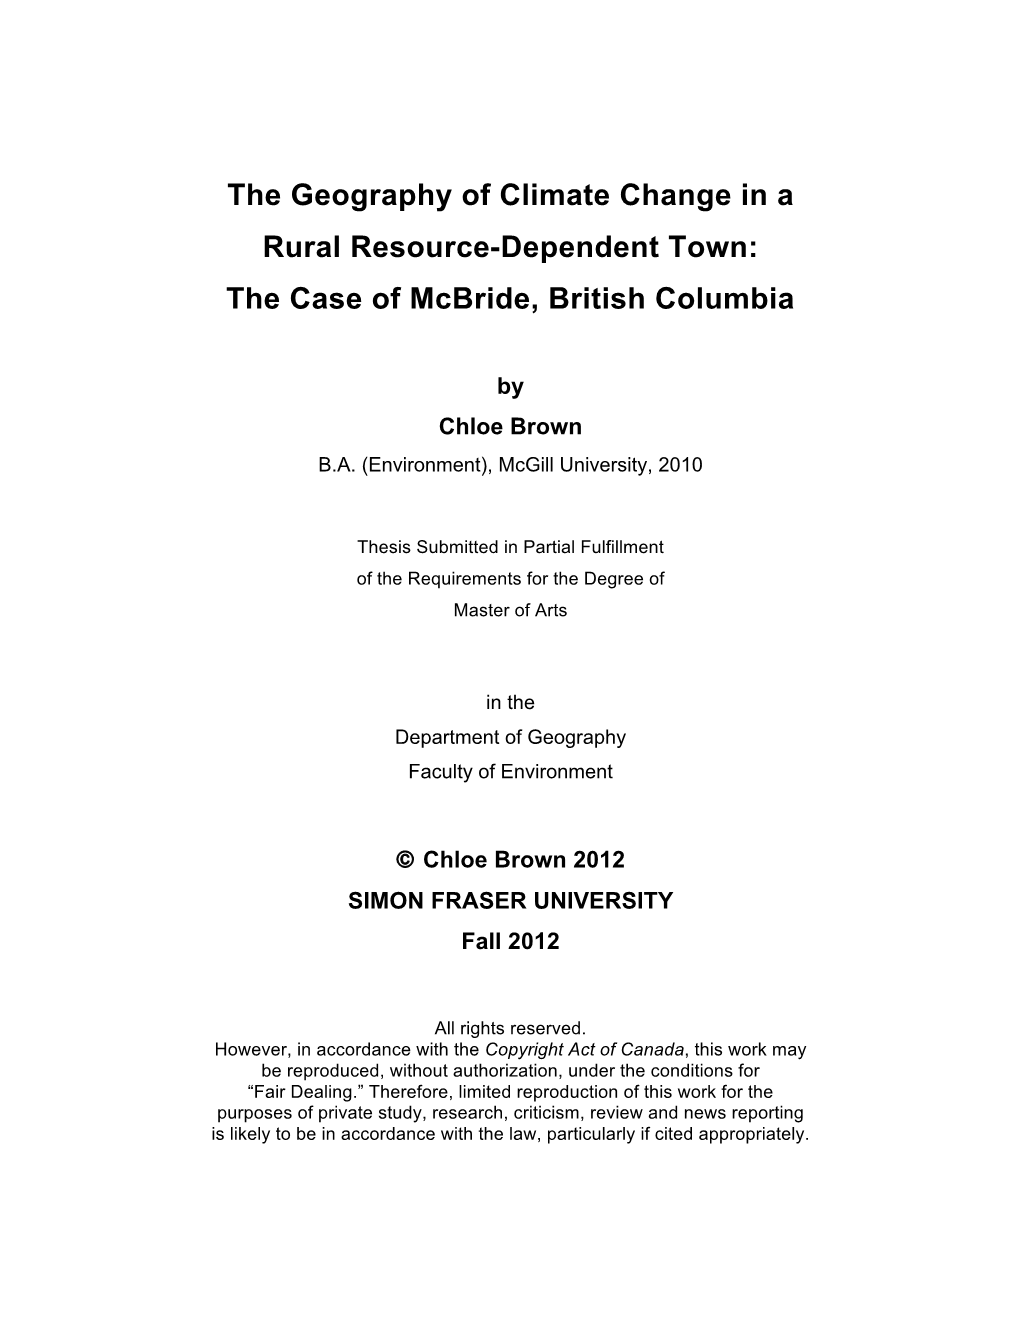 The Geography of Climate Change in a Rural Resource-Dependent Town: the Case of Mcbride, British Columbia